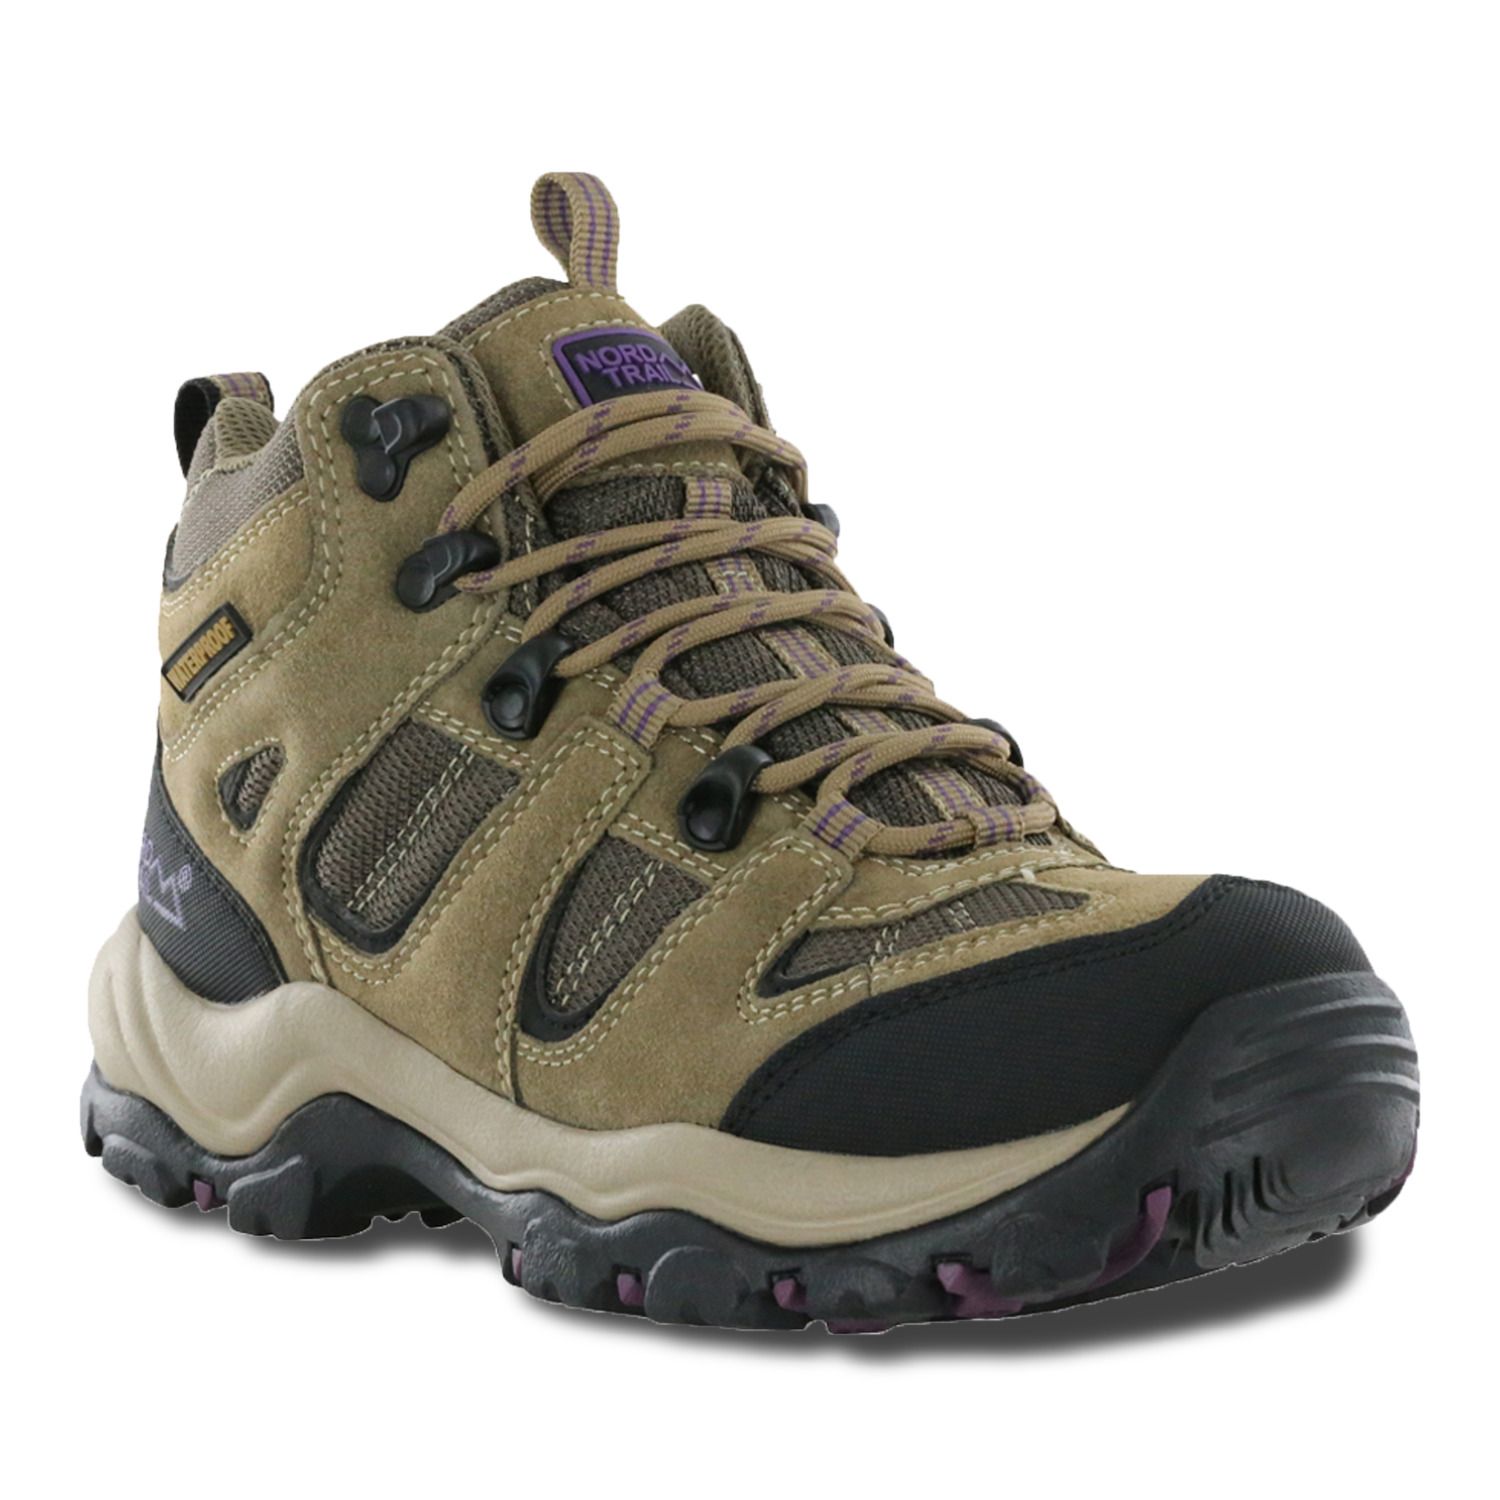 nord trail boots